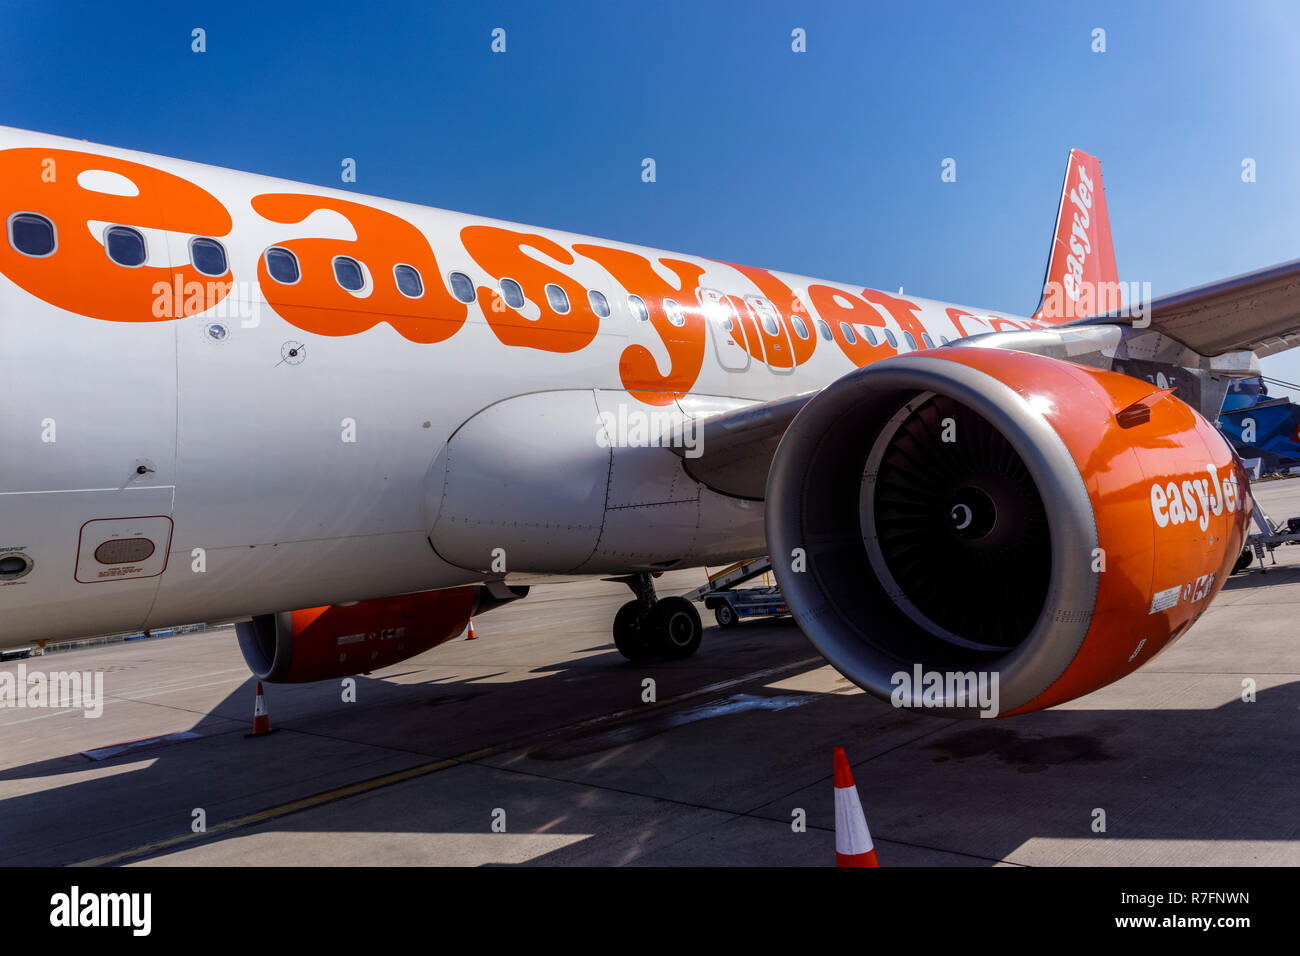 EasyJet plane at London Stansted Airport, England United Kingdom UK Stock Photo